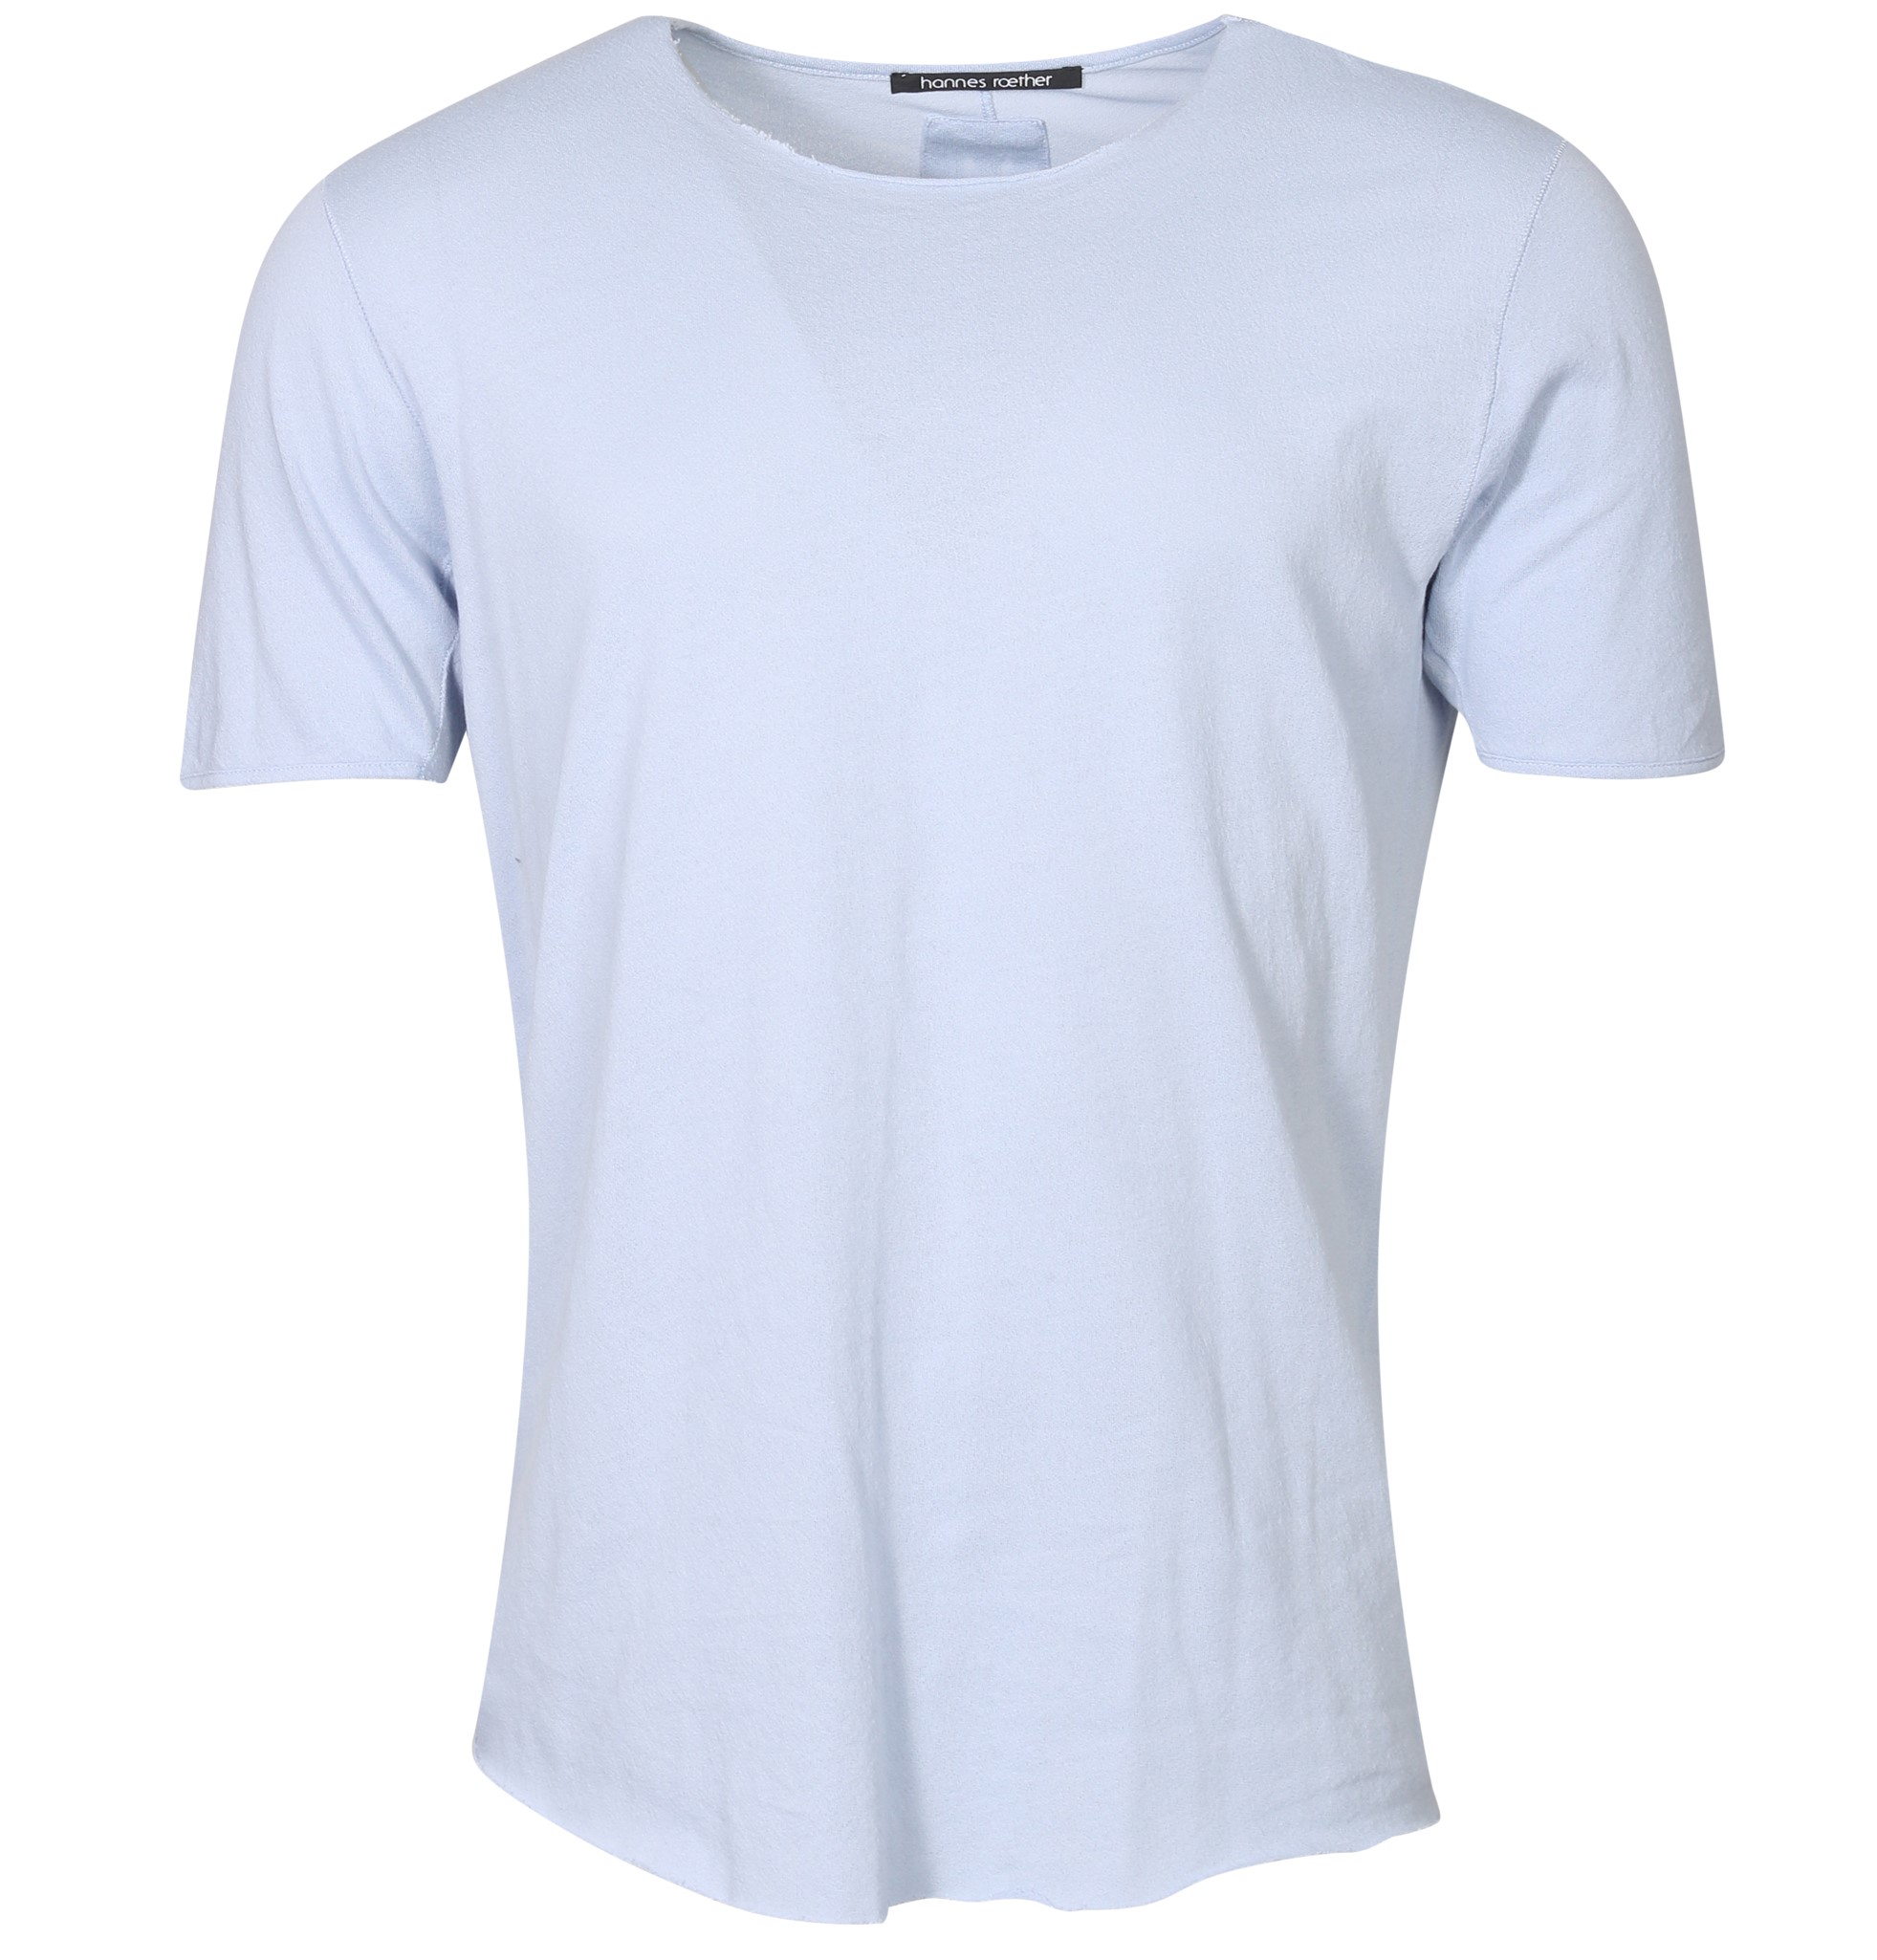 HANNES ROETHER T-Shirt in Light Blue 3XL